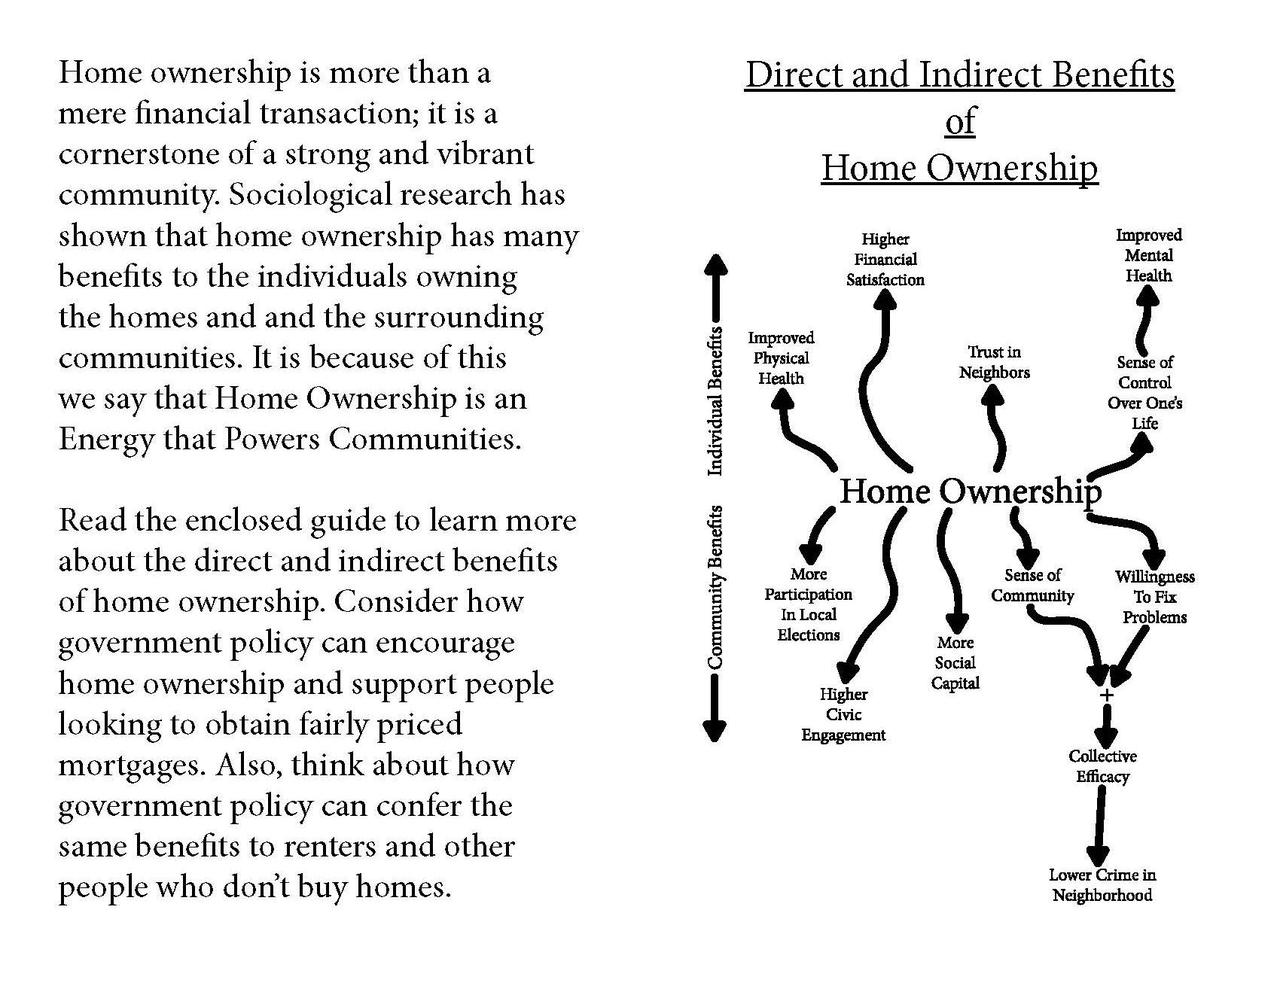 Intro to Homeownership summary along with diagram mapping out the benefits of home ownership. These include increased physical and mental health and more sense of community.